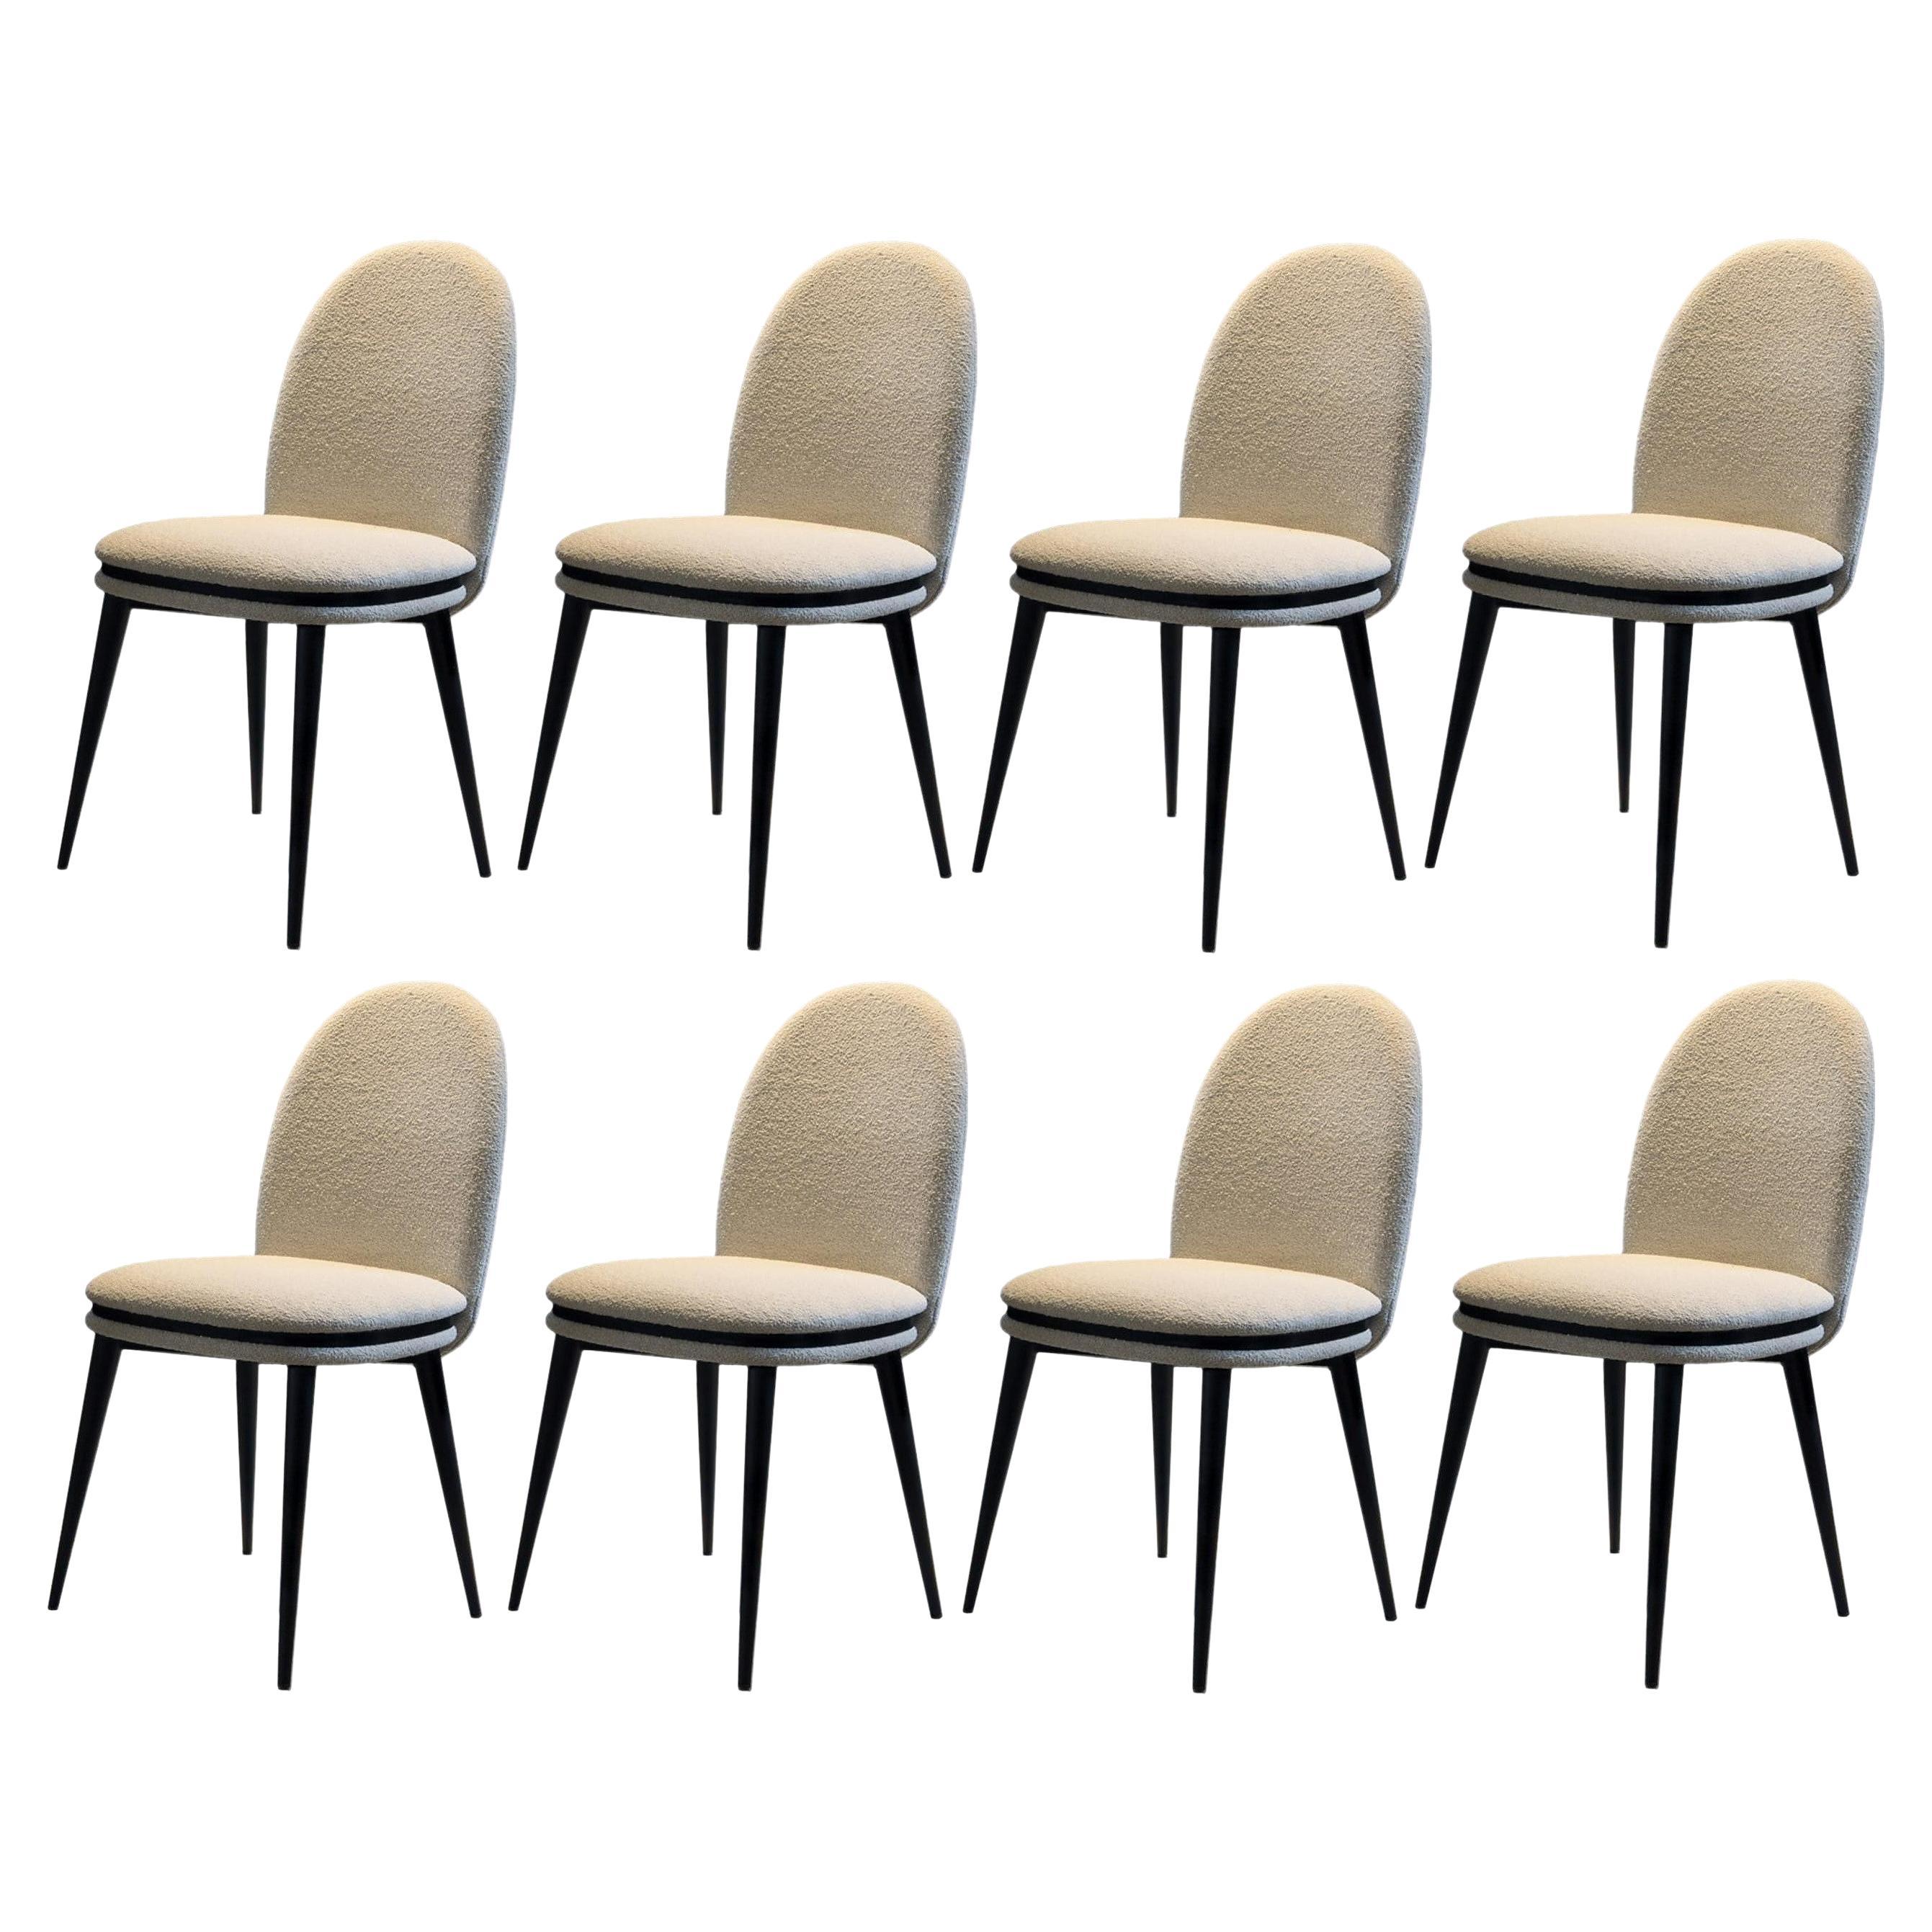 Italian Made Dining Chairs Offered in Bouclé, Set of 8 For Sale